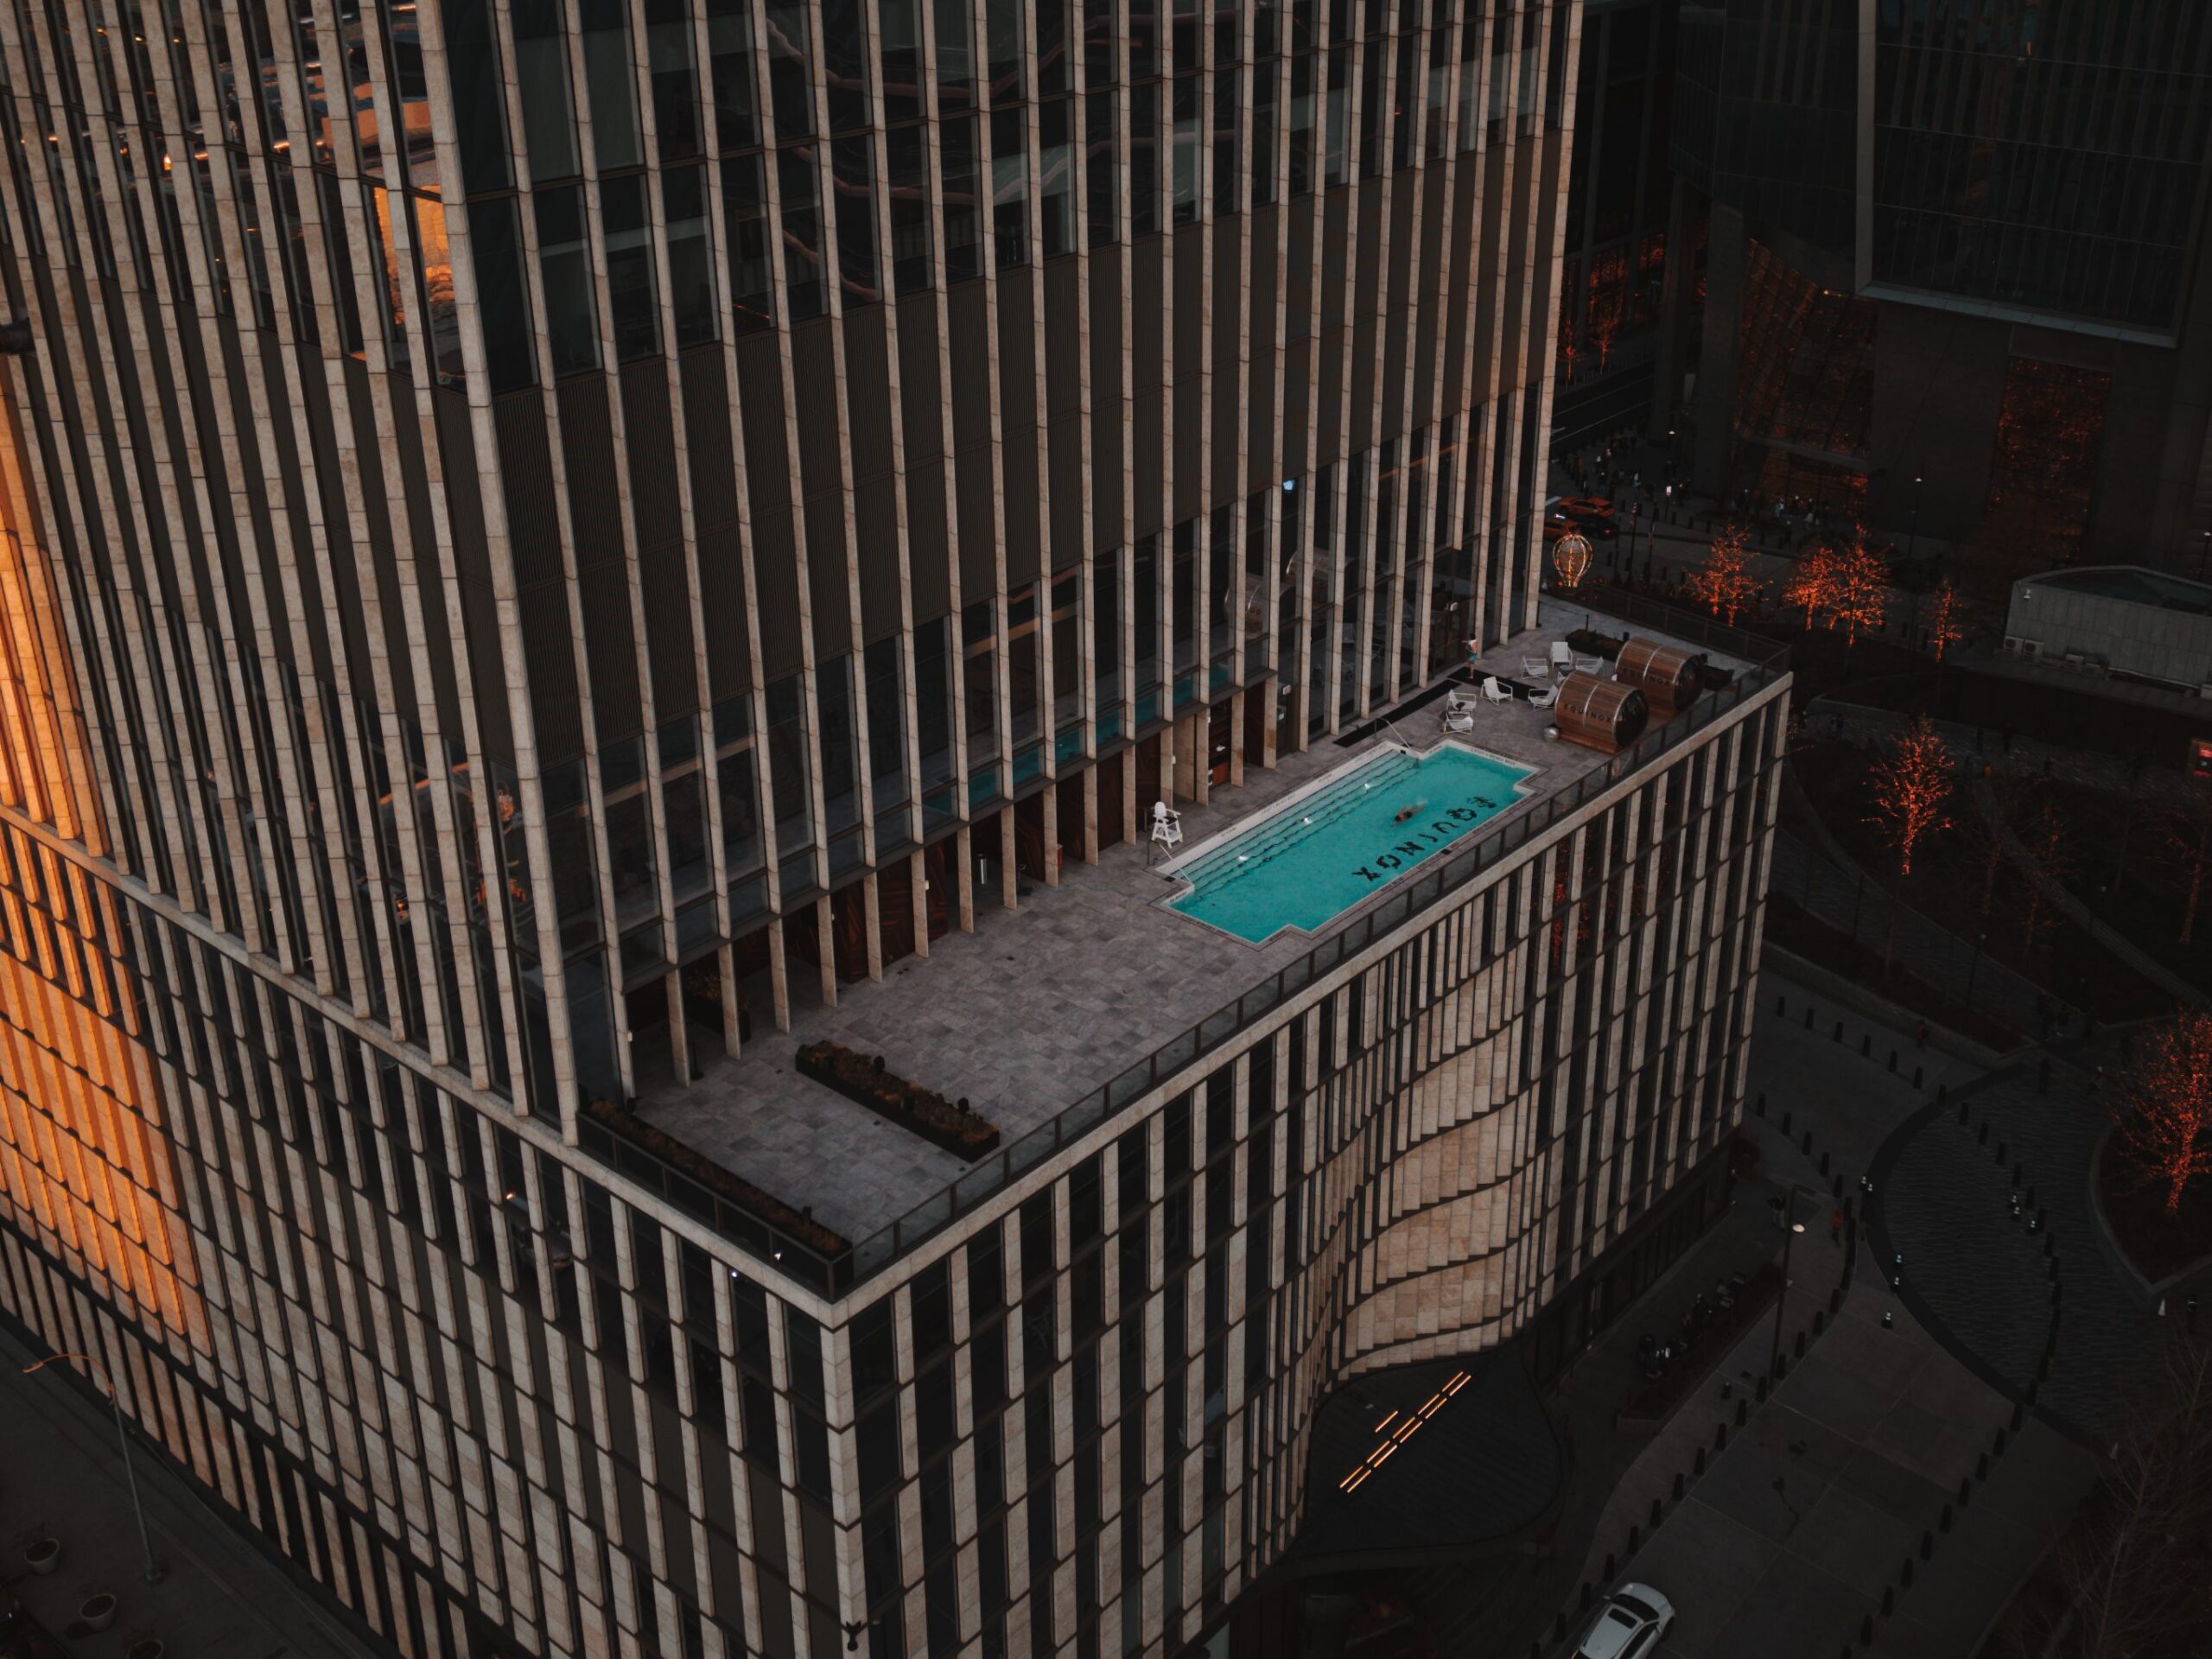 Equinox Hotel Pool view from above